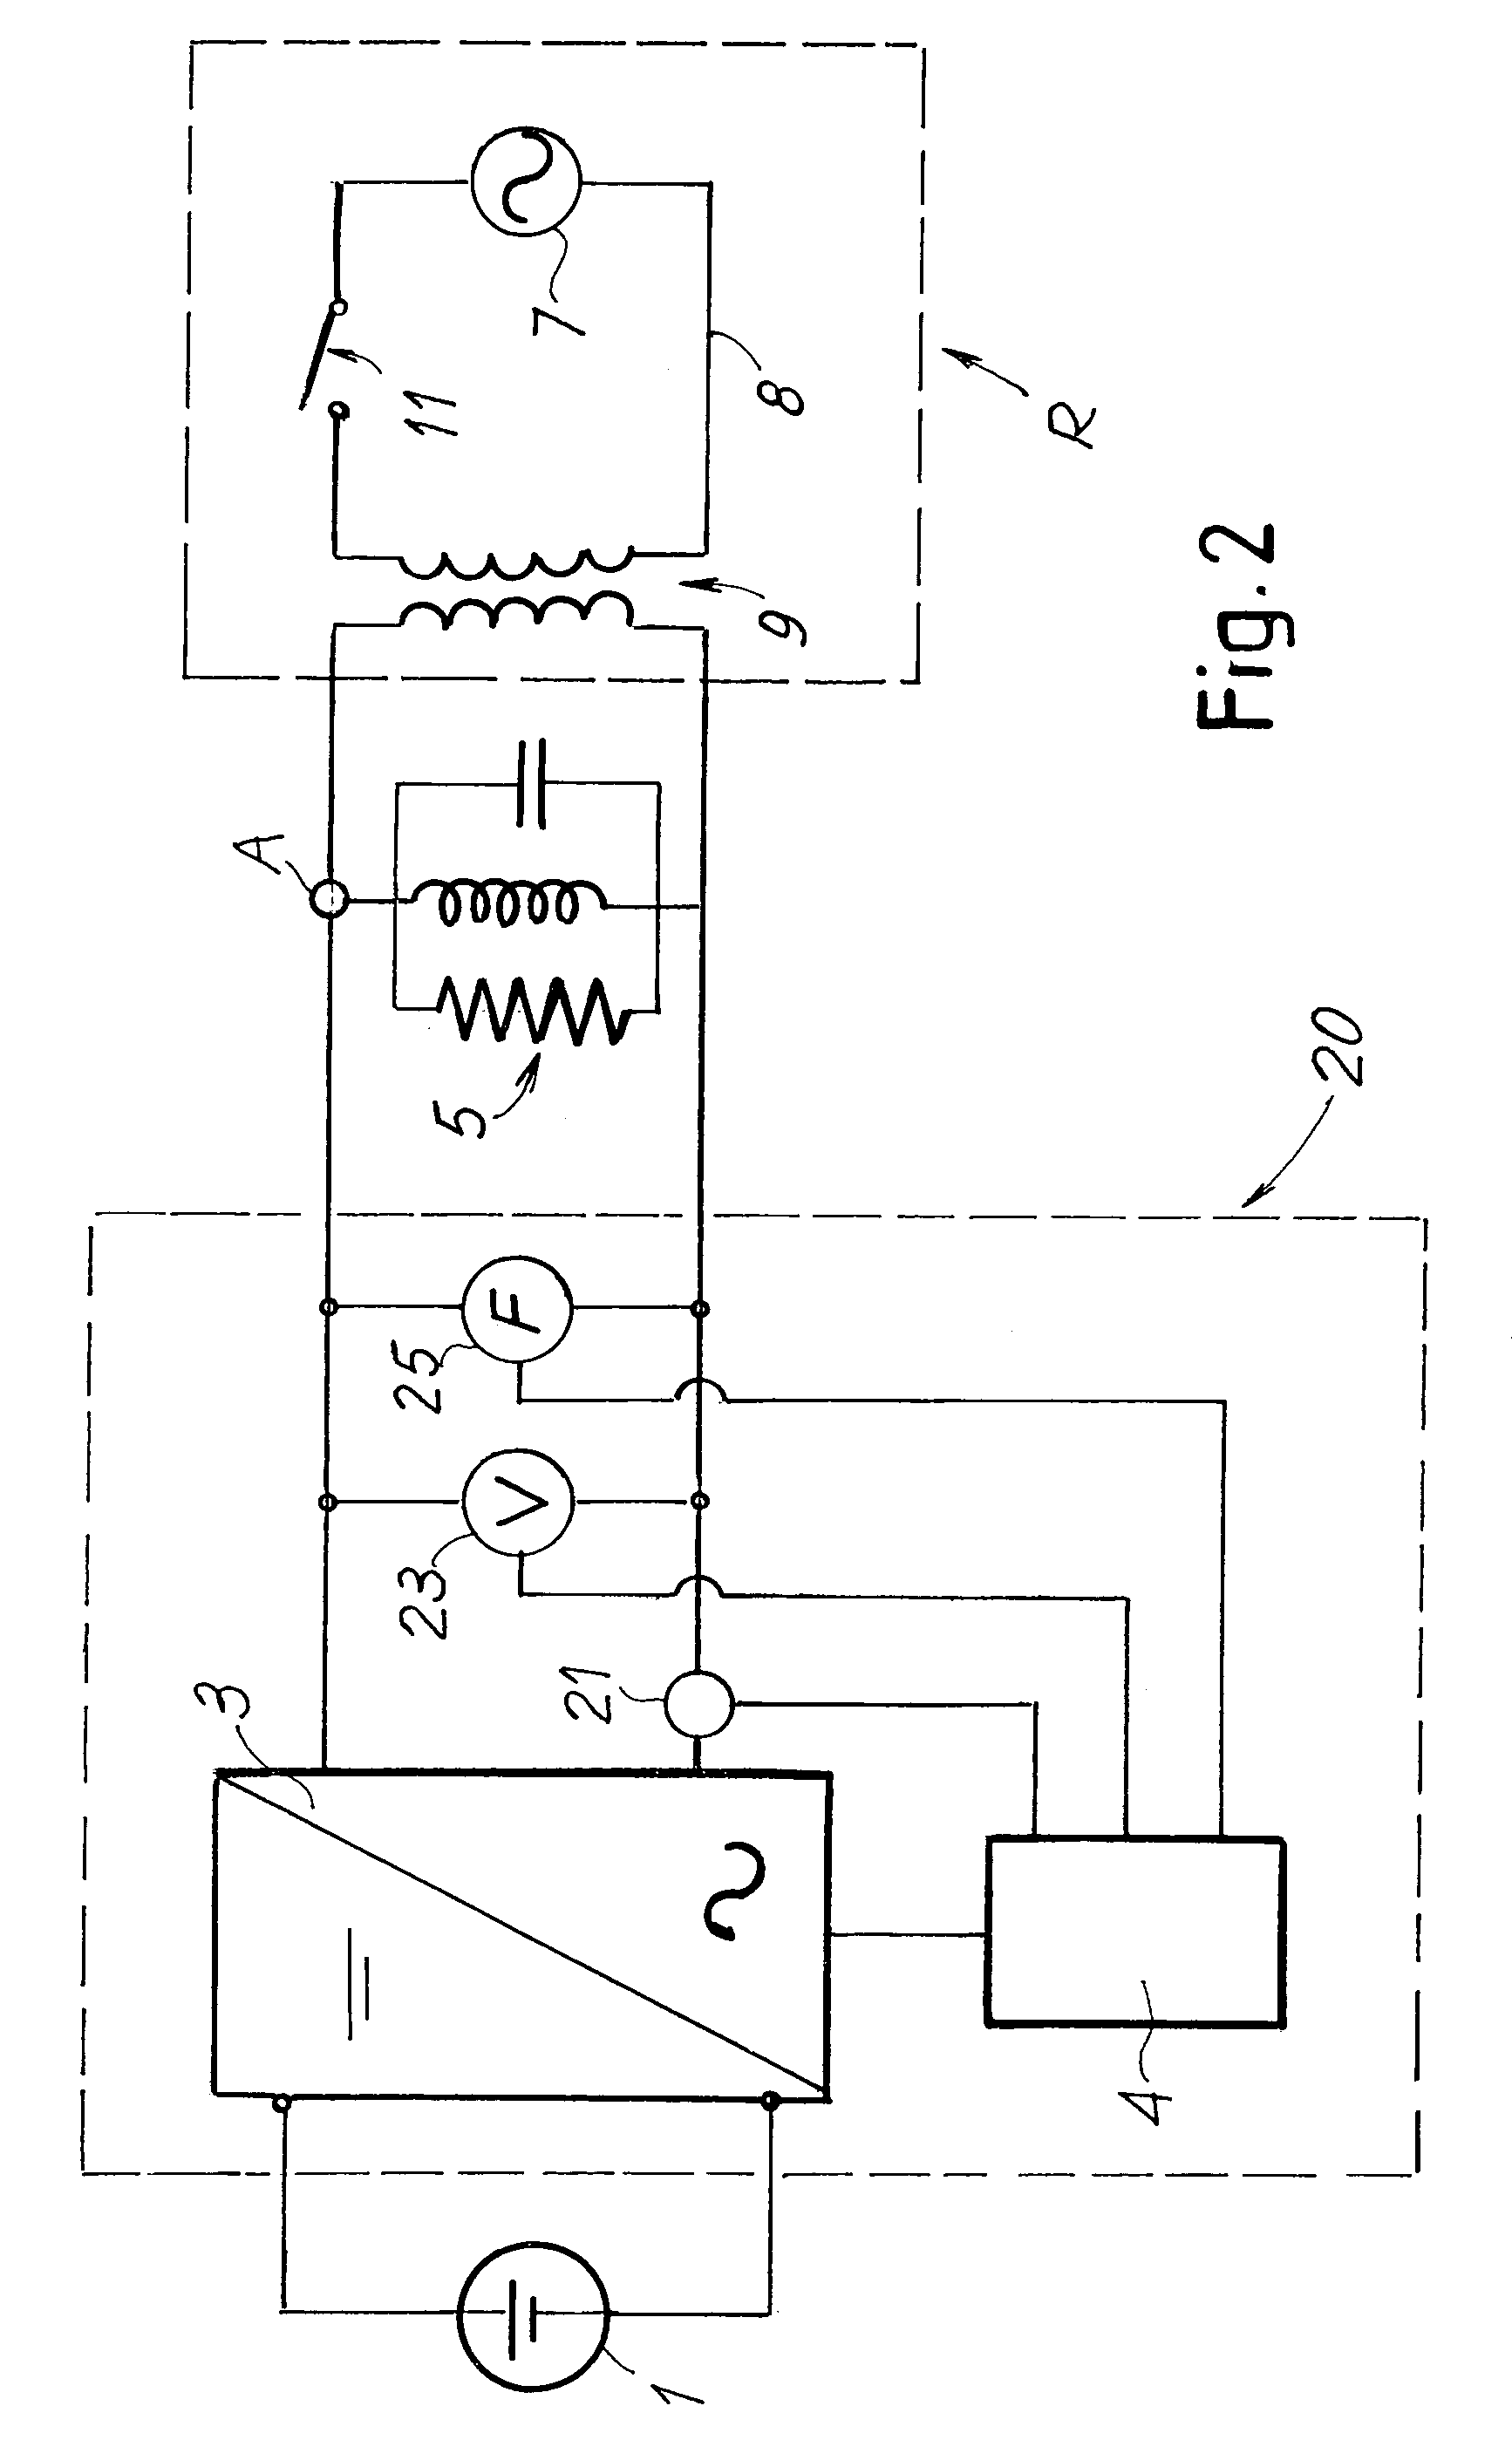 Anti-islanding method and system for distributed power generation systems